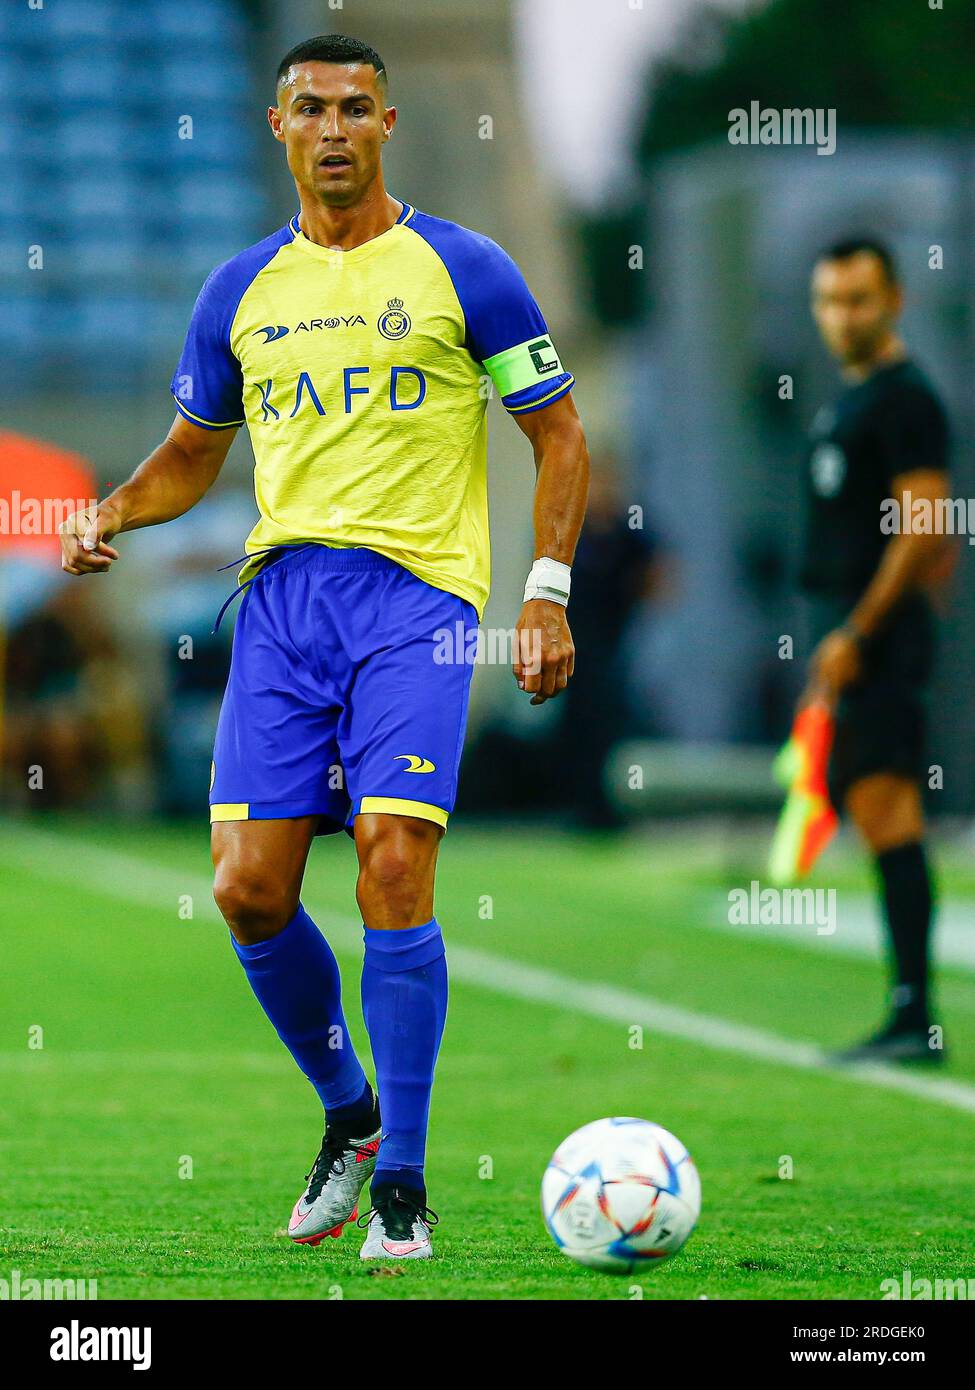 Faro, Portugal. 20th July, 2023. Cristiano Ronaldo of Al Nassr during the Algarve Cup match, between Al Nassr and Benfica played at Algarve Stadium on July 20 2023 in Faro, Spain. (Photo by Antonio Pozo/Pressinphoto) Credit: PRESSINPHOTO SPORTS AGENCY/Alamy Live News Stock Photo